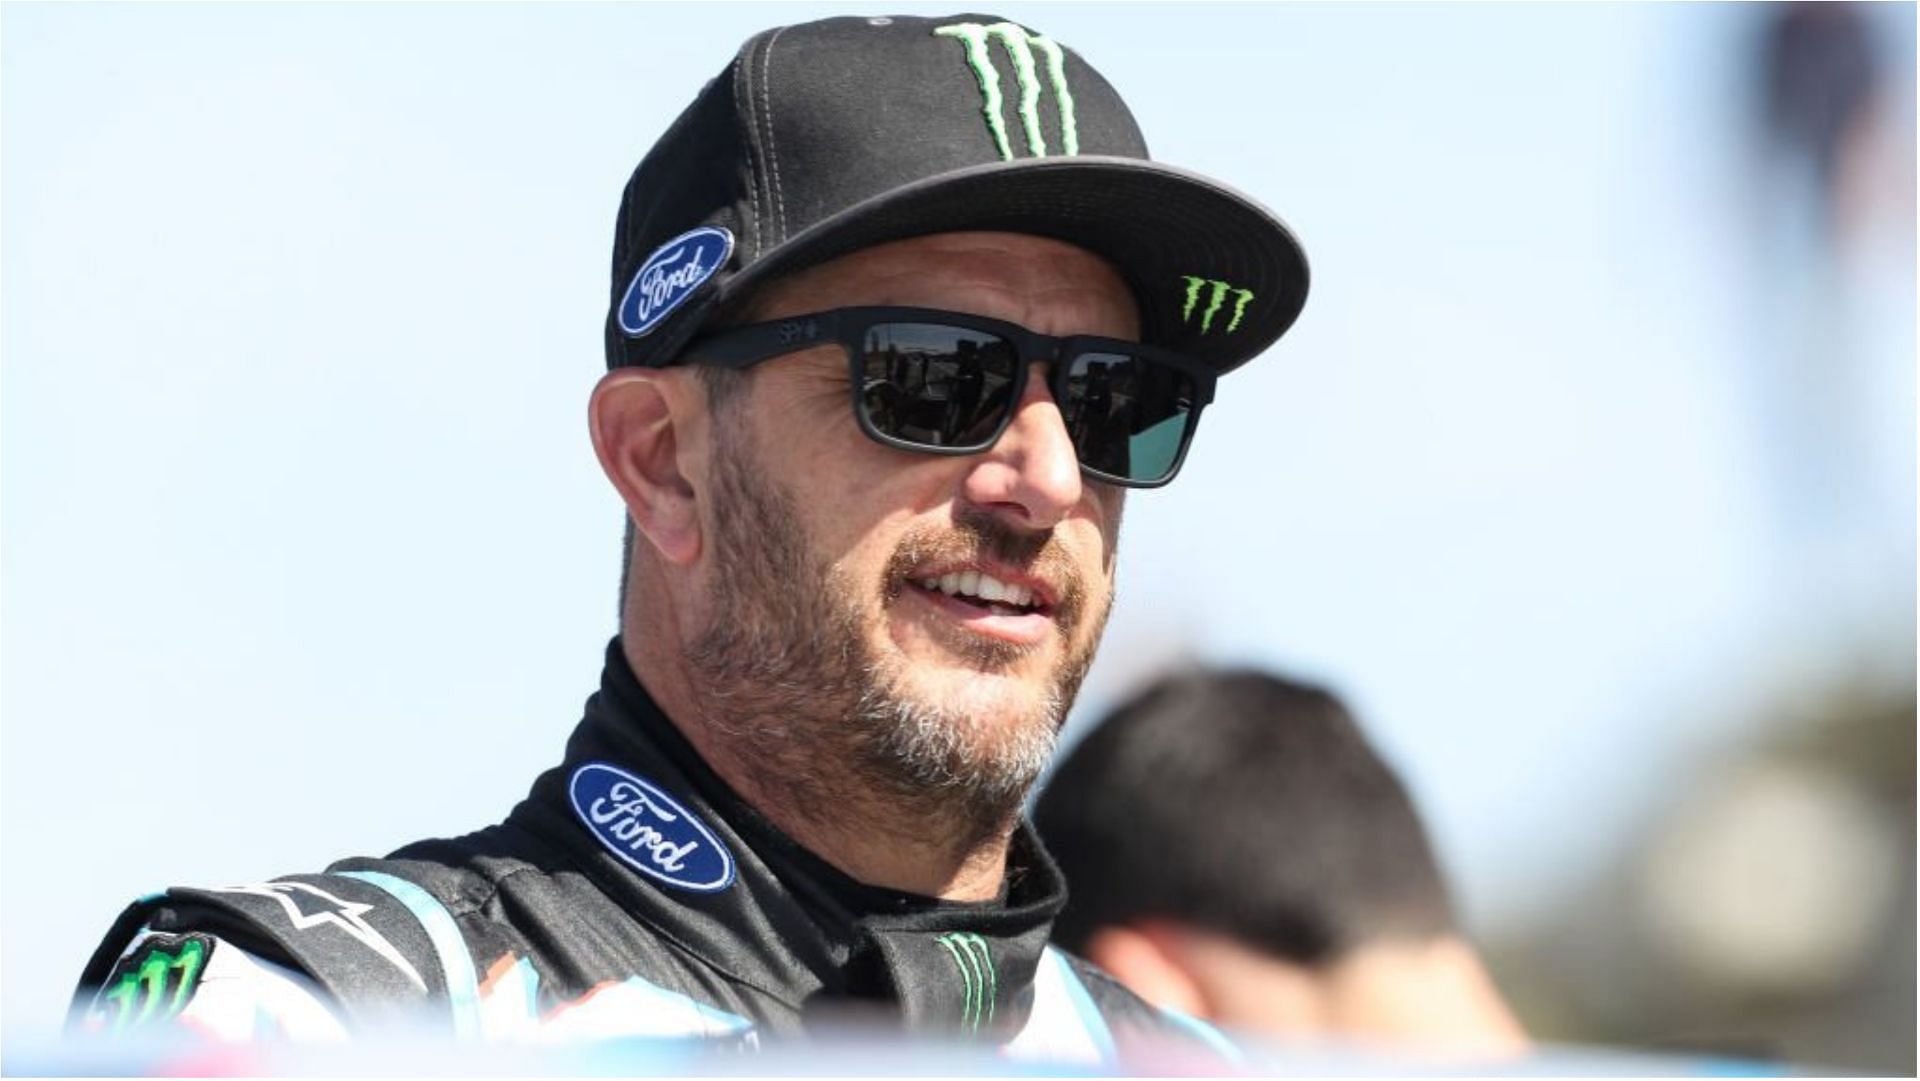 Who founded DC shoes? Ken Block net worth explored in wake of rally